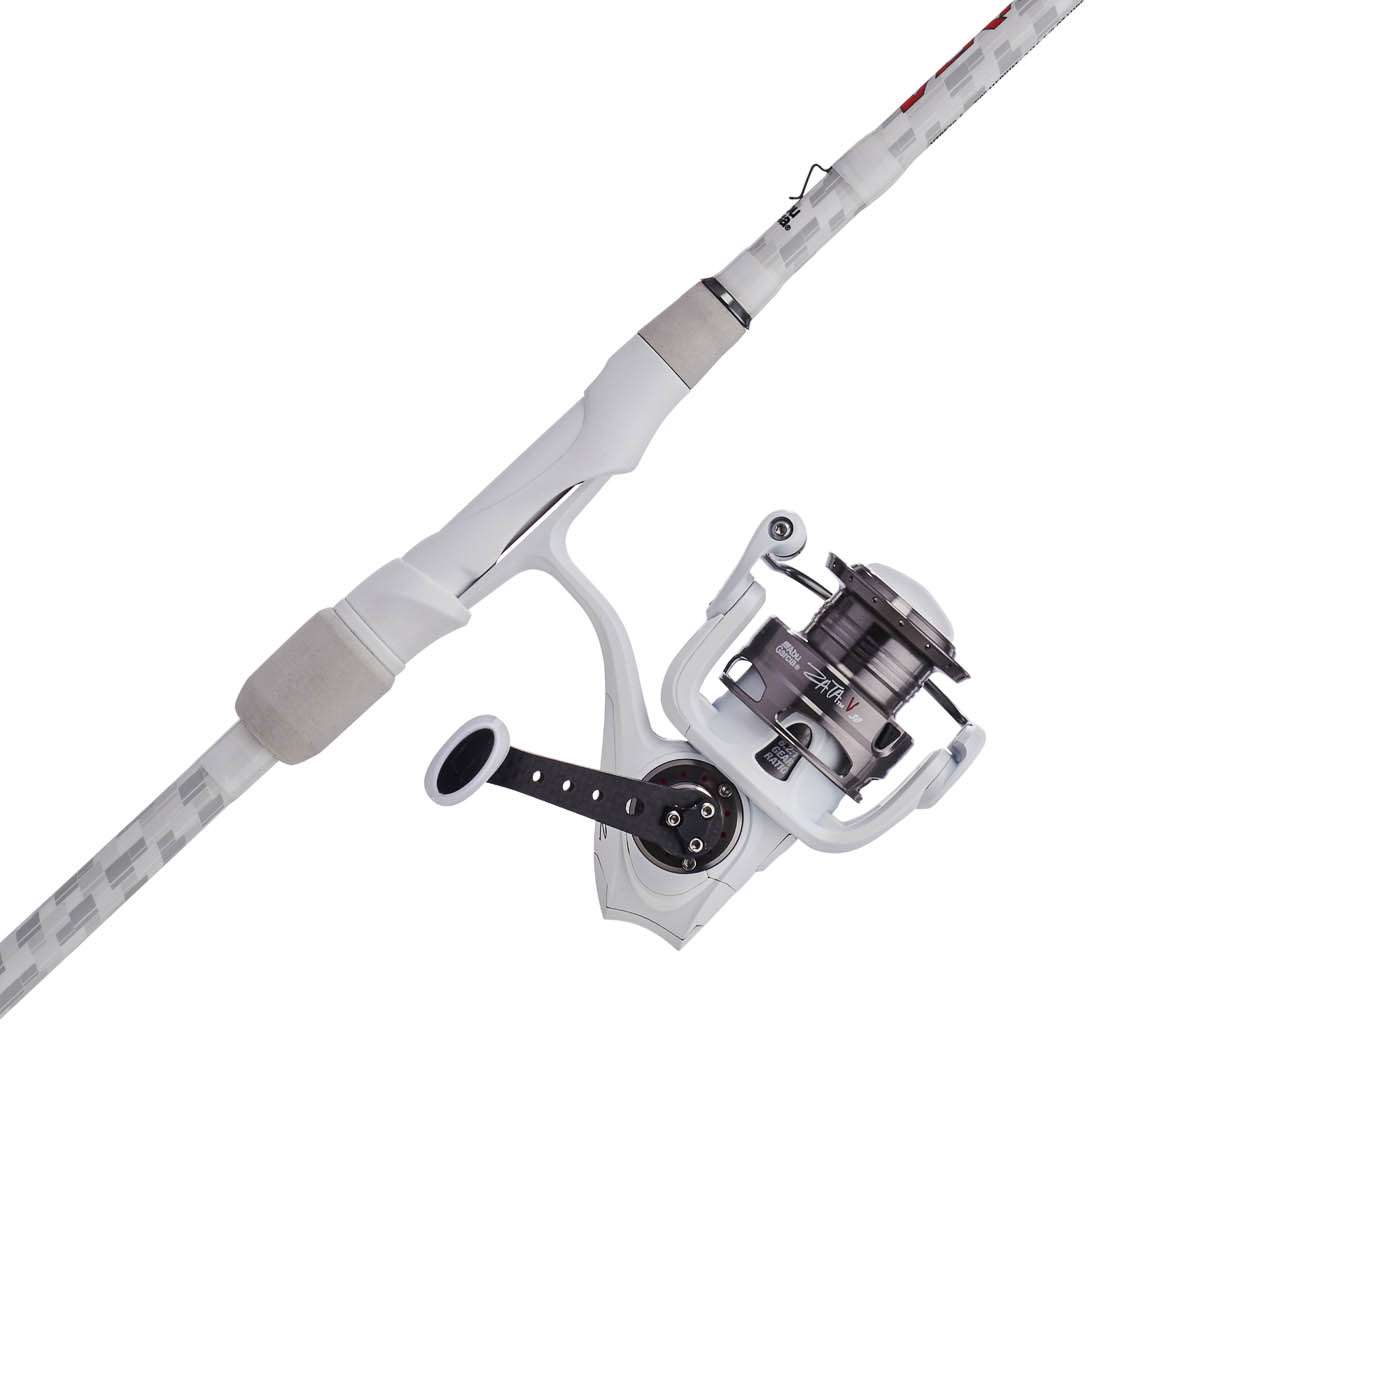 <p><strong>Abu Garcia Veritas Spinning Combo</strong></p><p>This feature packed combo features a reel with a 10+1 bearing system inside a lightweight aluminum frame. The rod is powered by Abuâs exclusive Powerlux 100 Nano resin, providing a stronger, lighter, more sensitive rod. The ROCS (Robotically Optimized Casting System) Guide train provides maximized casting distance with lighter baits. Titanium alloy guides with ultra-light zirconium inserts allow for a lightweight, balanced feel. $284.95. <a href=